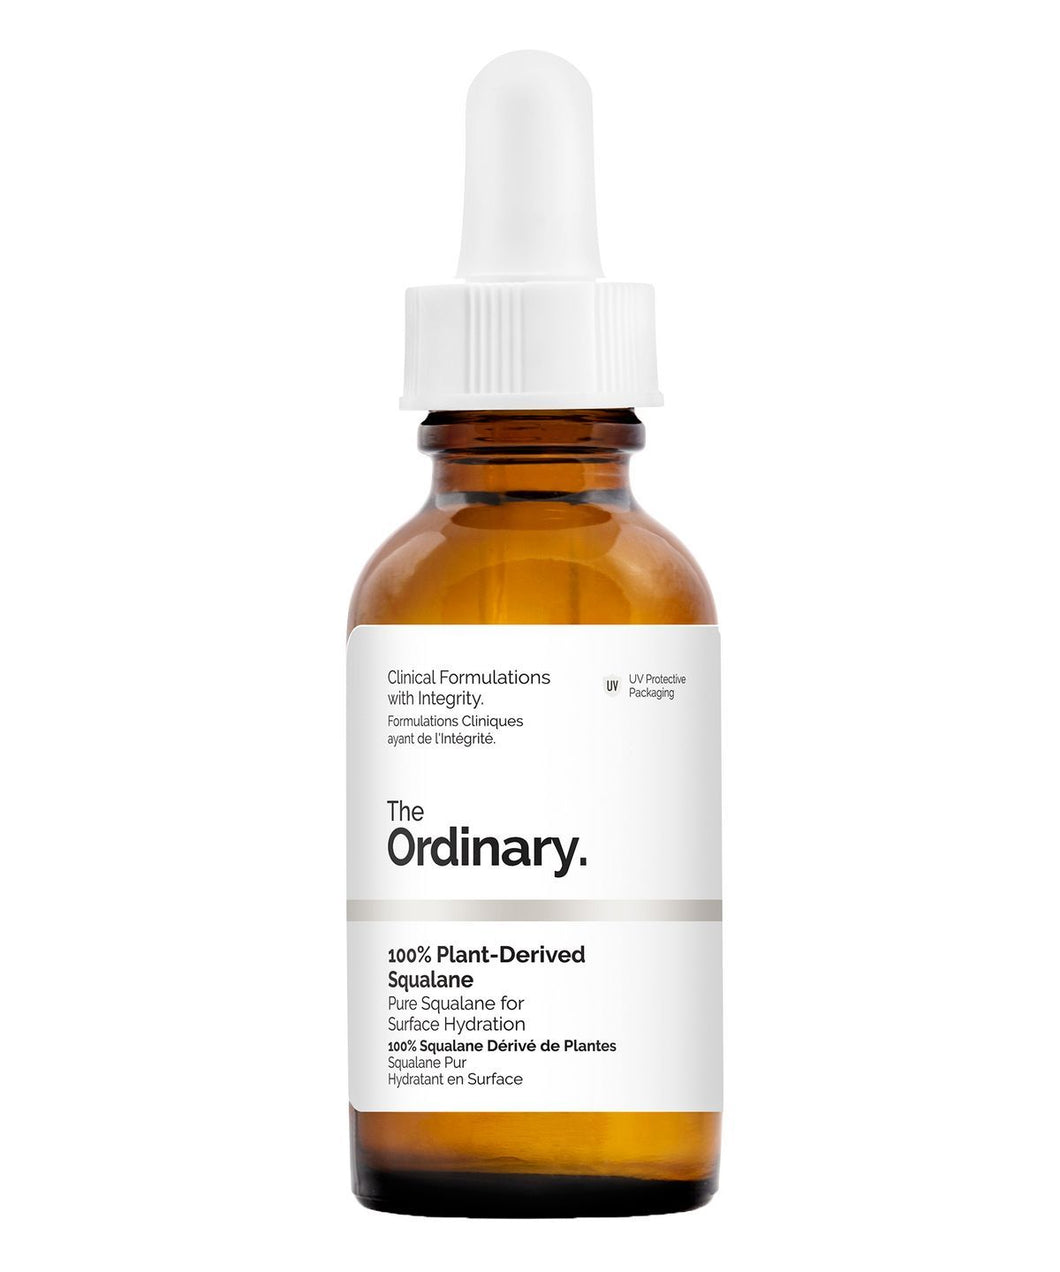 The Ordinary 100% Plant-Derived Squalane The Ordinary 100% Organic Cold-Pressed Rose Hip Seed Oil available online in UAE